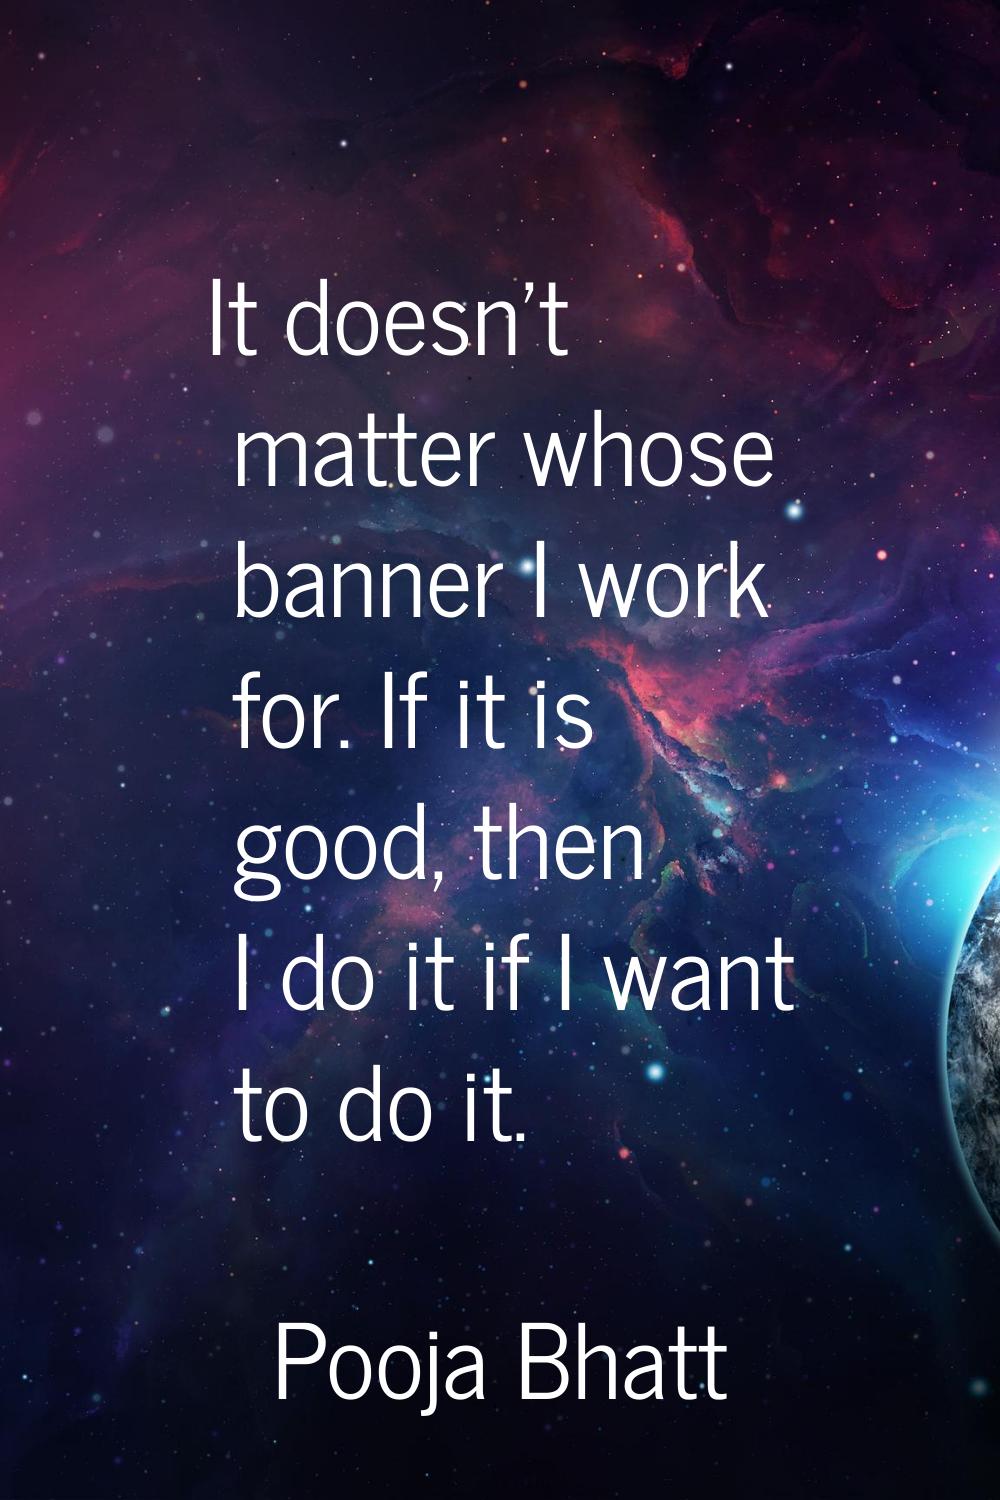 It doesn't matter whose banner I work for. If it is good, then I do it if I want to do it.